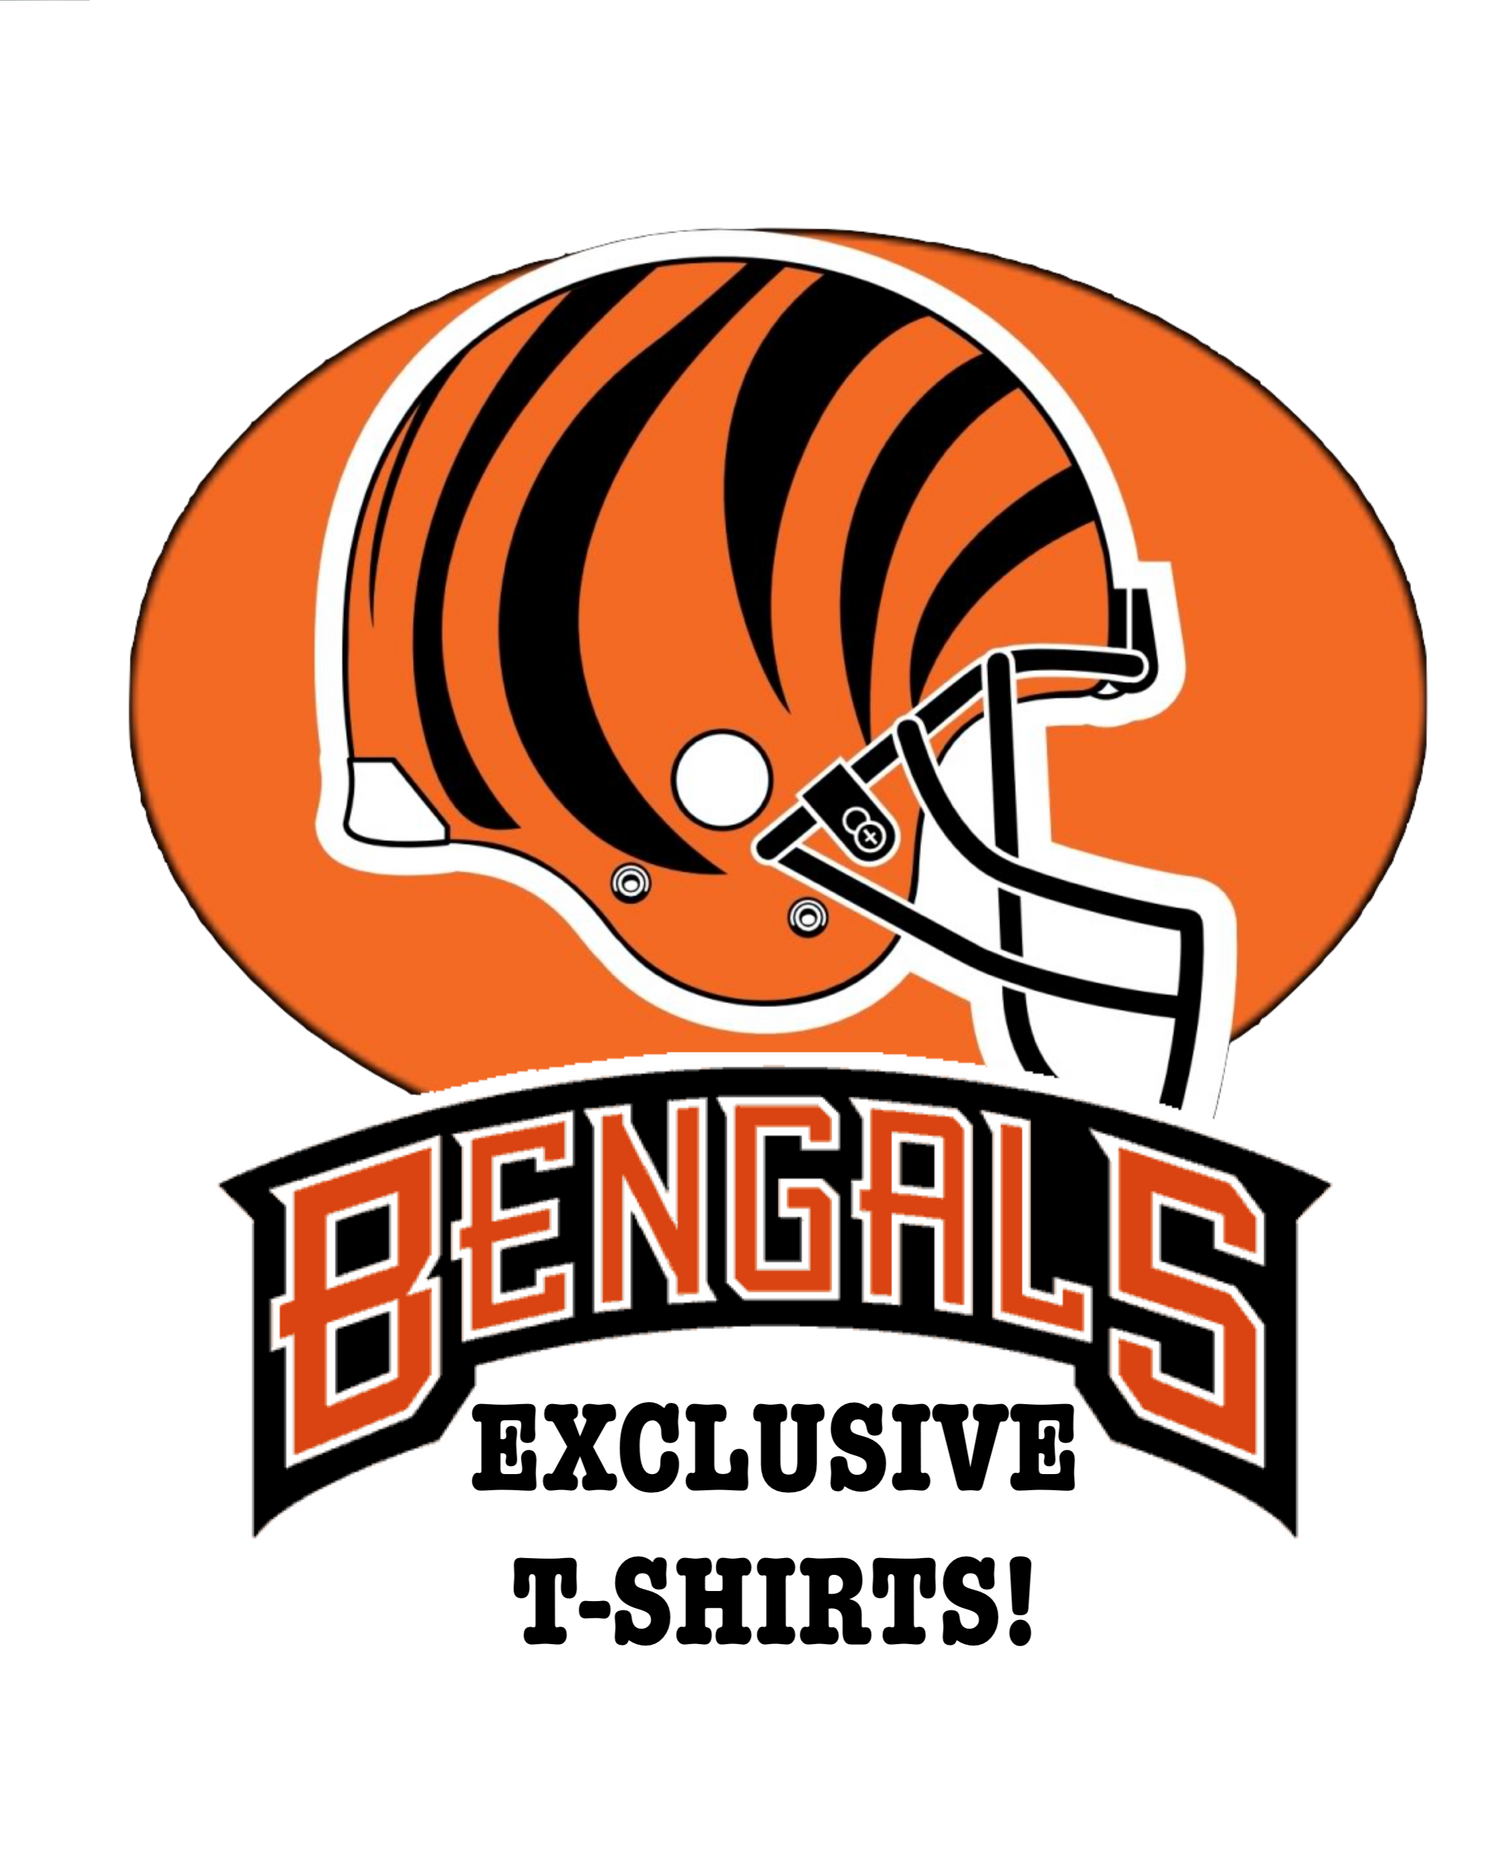 WHODEY: EXCLUSIVES!